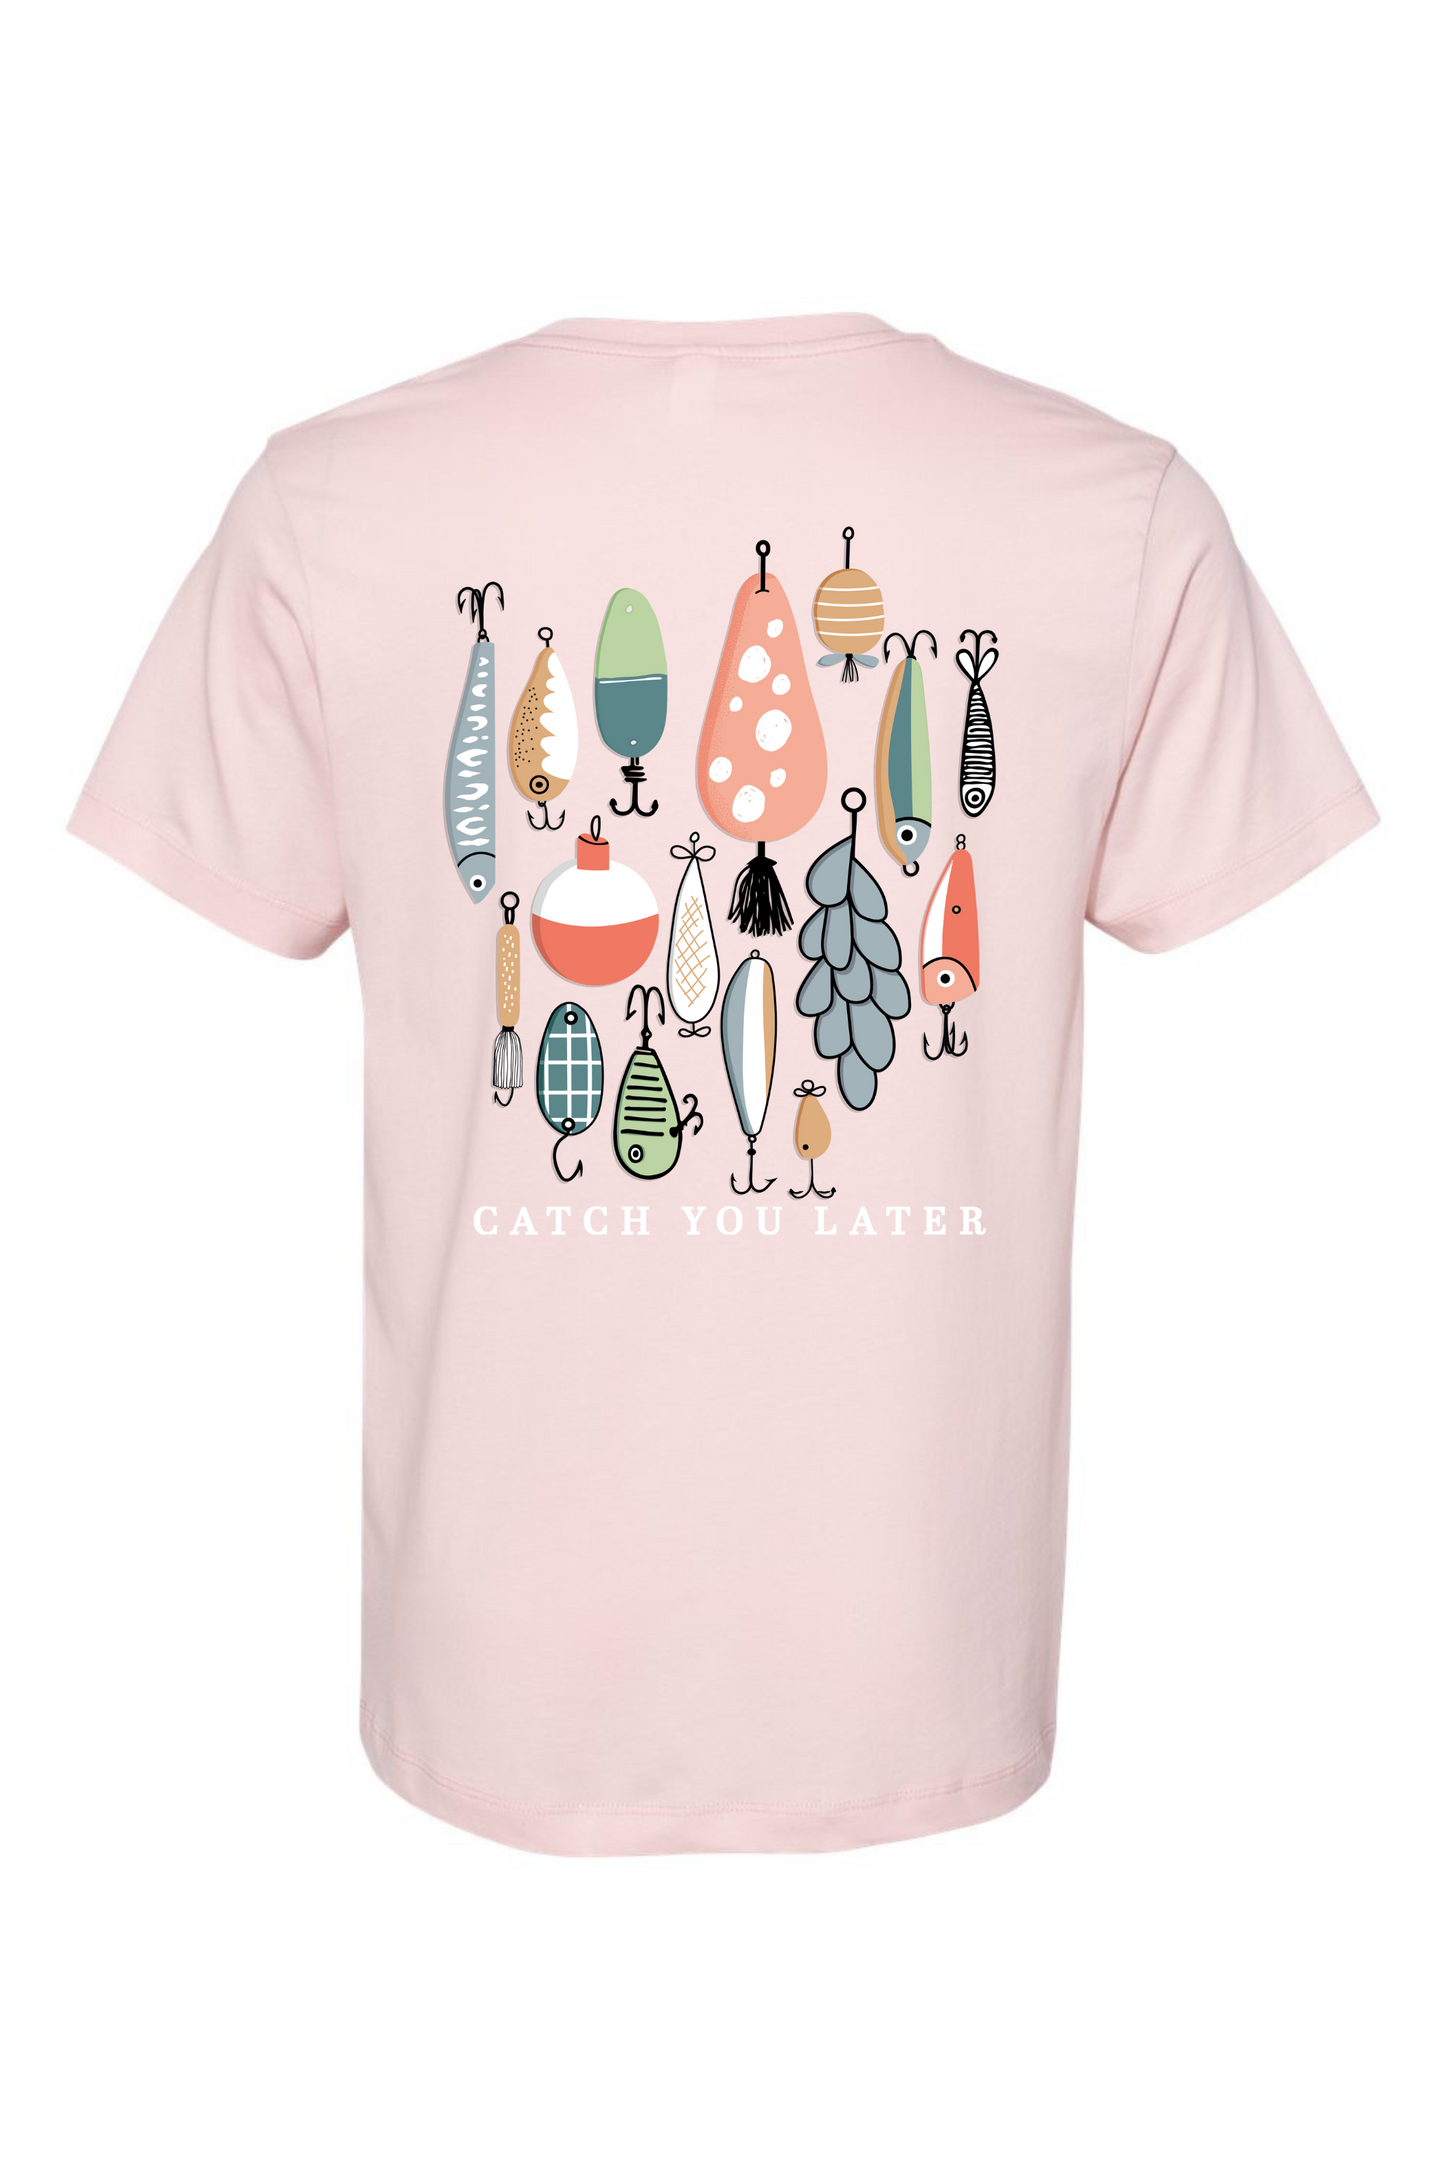 Catch You Later | Women's Tee-Adult Tee-Sister Shirts-Sister Shirts, Cute & Custom Tees for Mama & Littles in Trussville, Alabama.